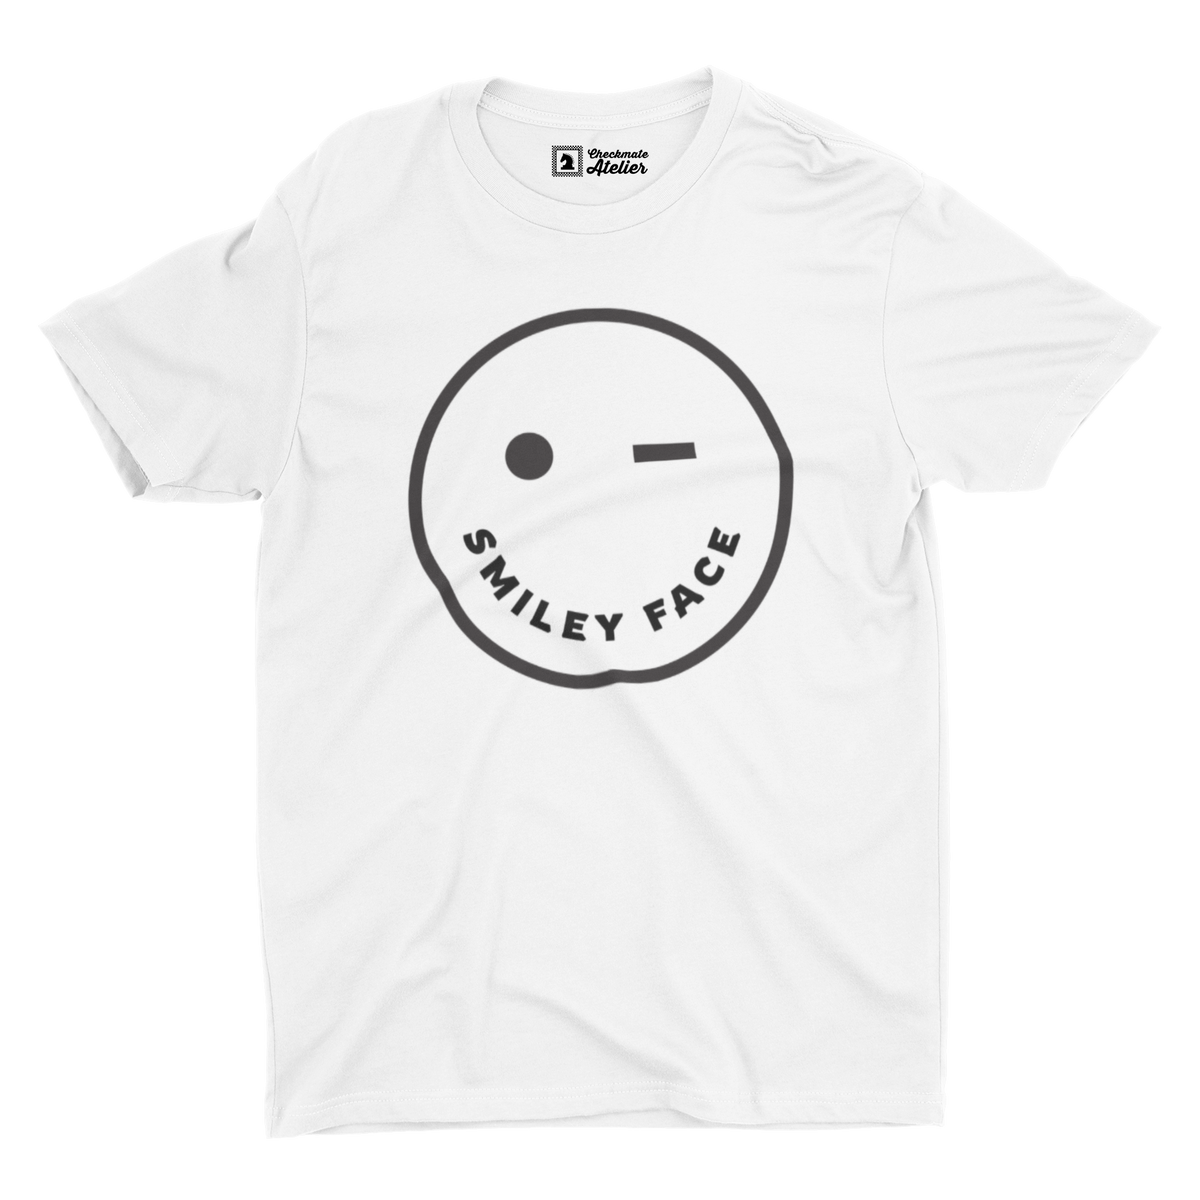 Smiley Face White B&W T-Shirt - Checkmate Atelier - Official Online Store